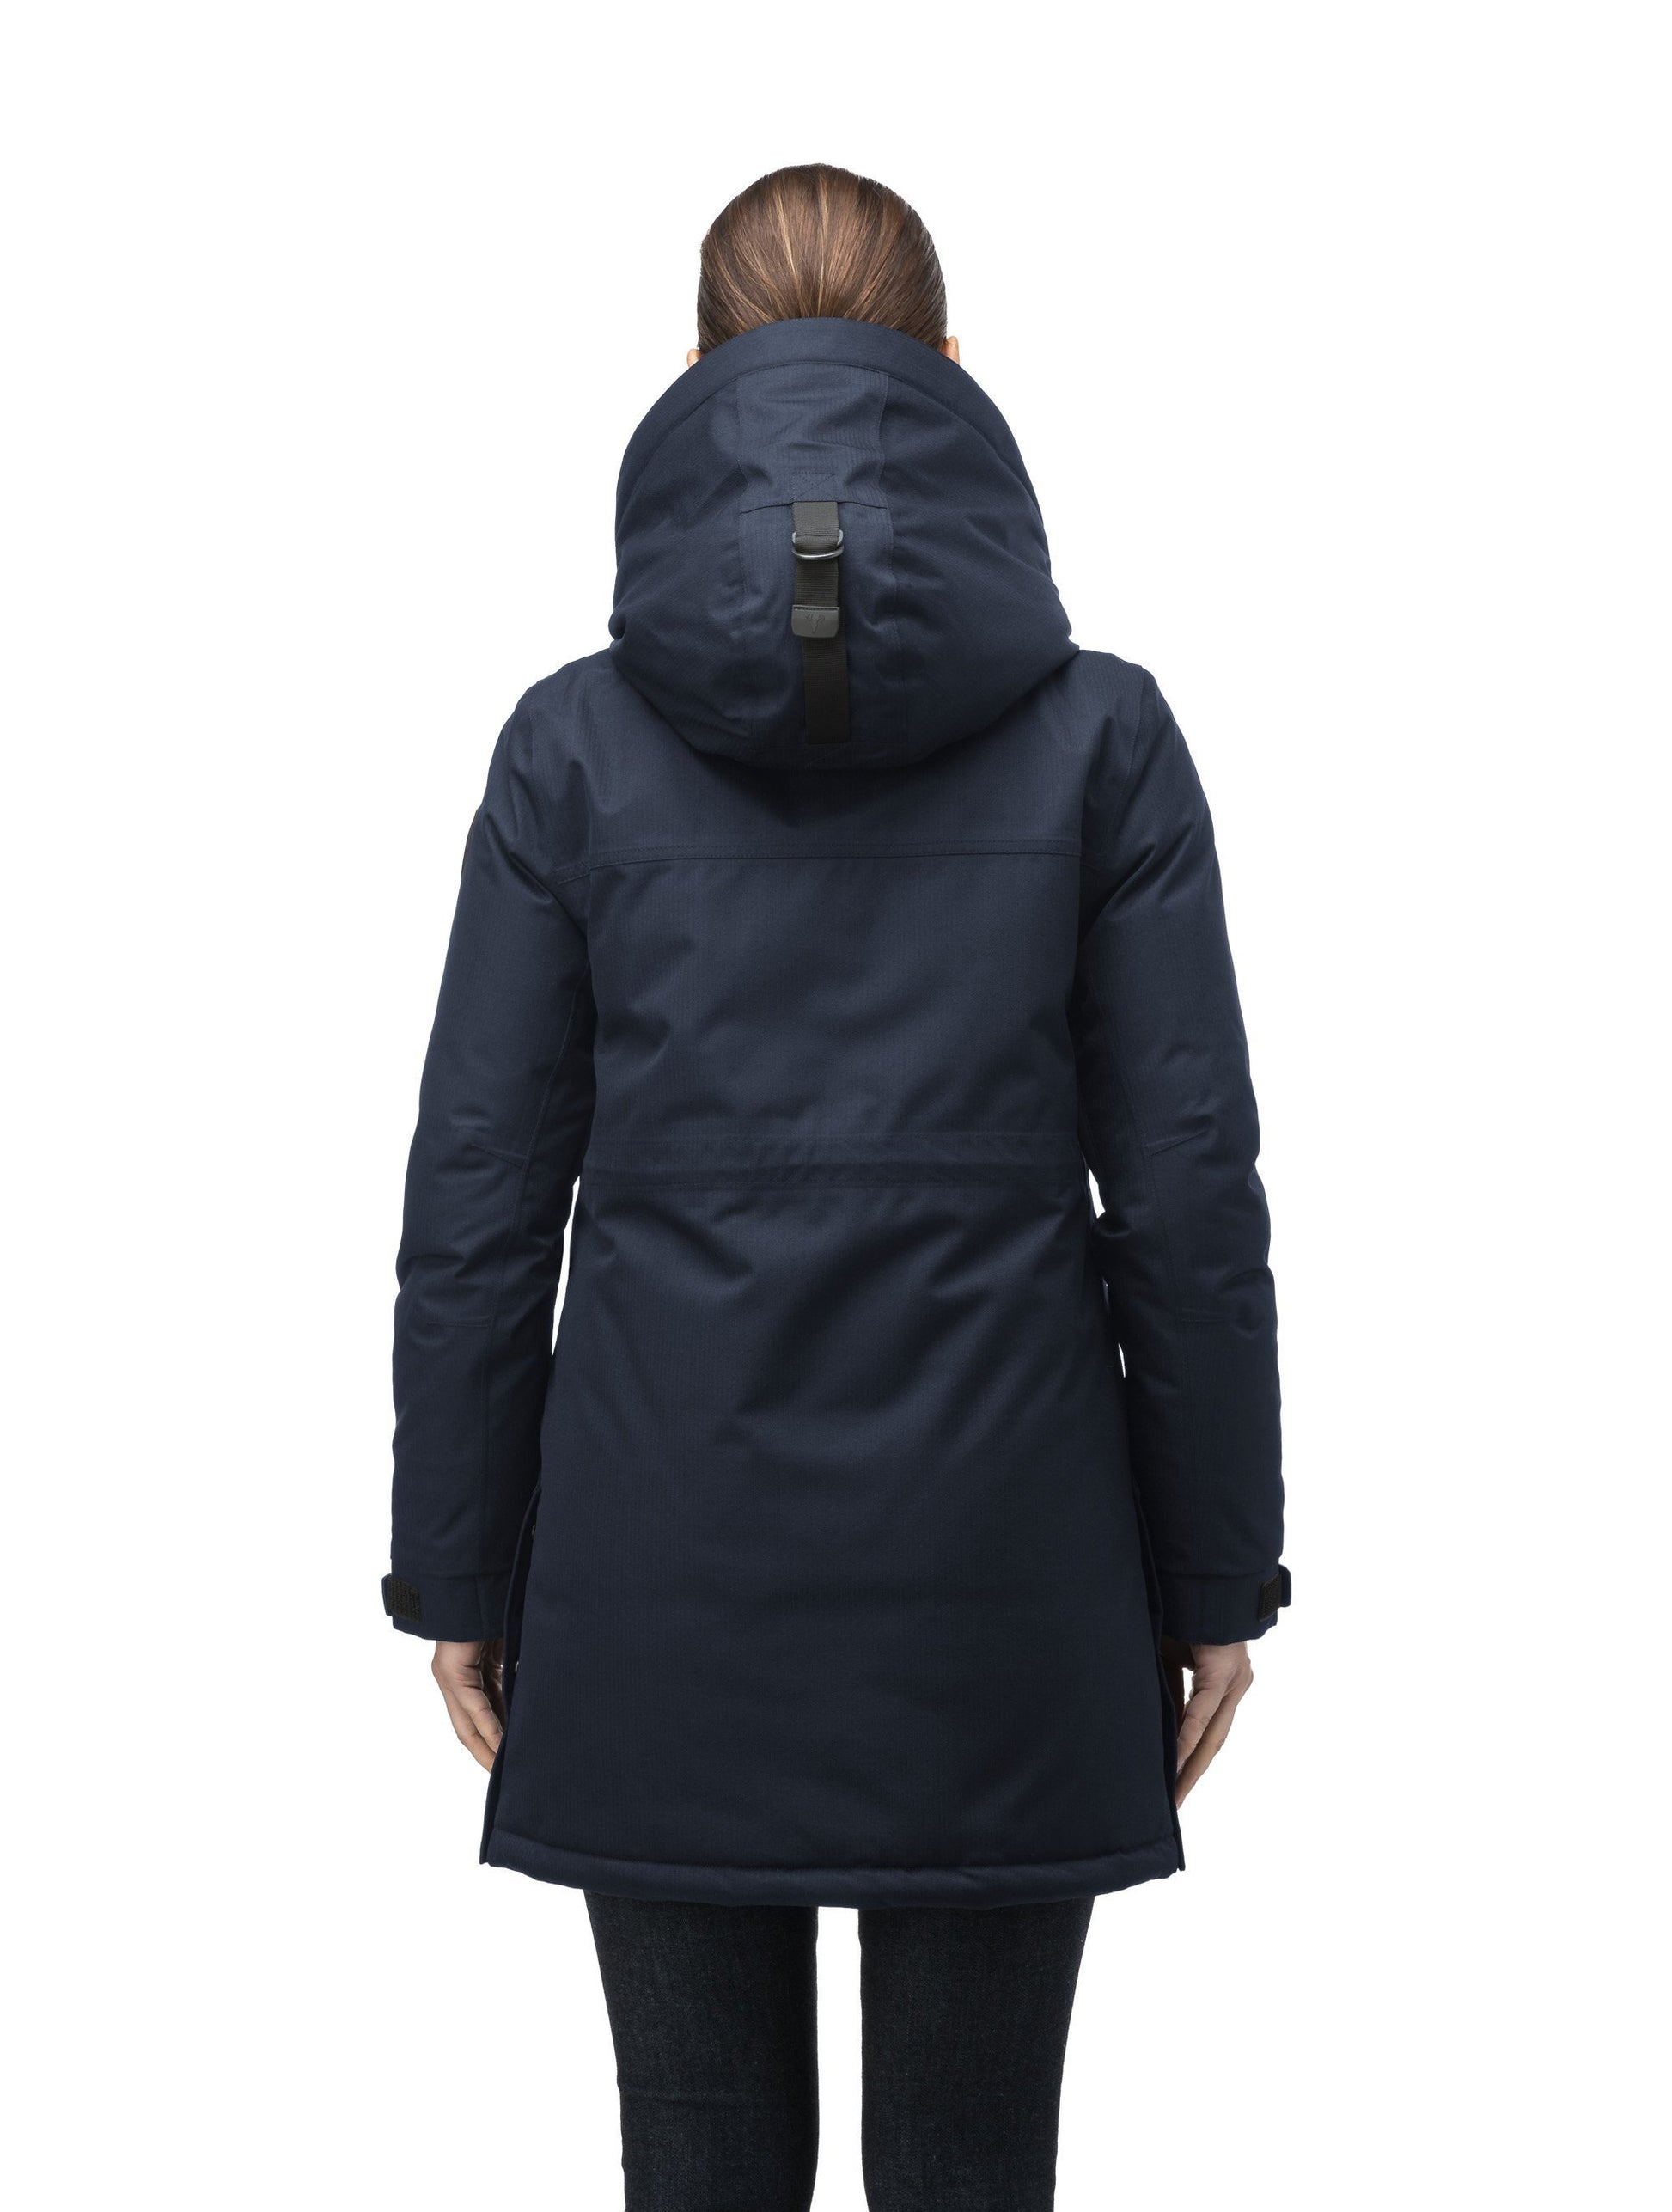 Thigh length women's down filled parka with side entry pockets and drawcord waist, removable hood and fur trim in Navy